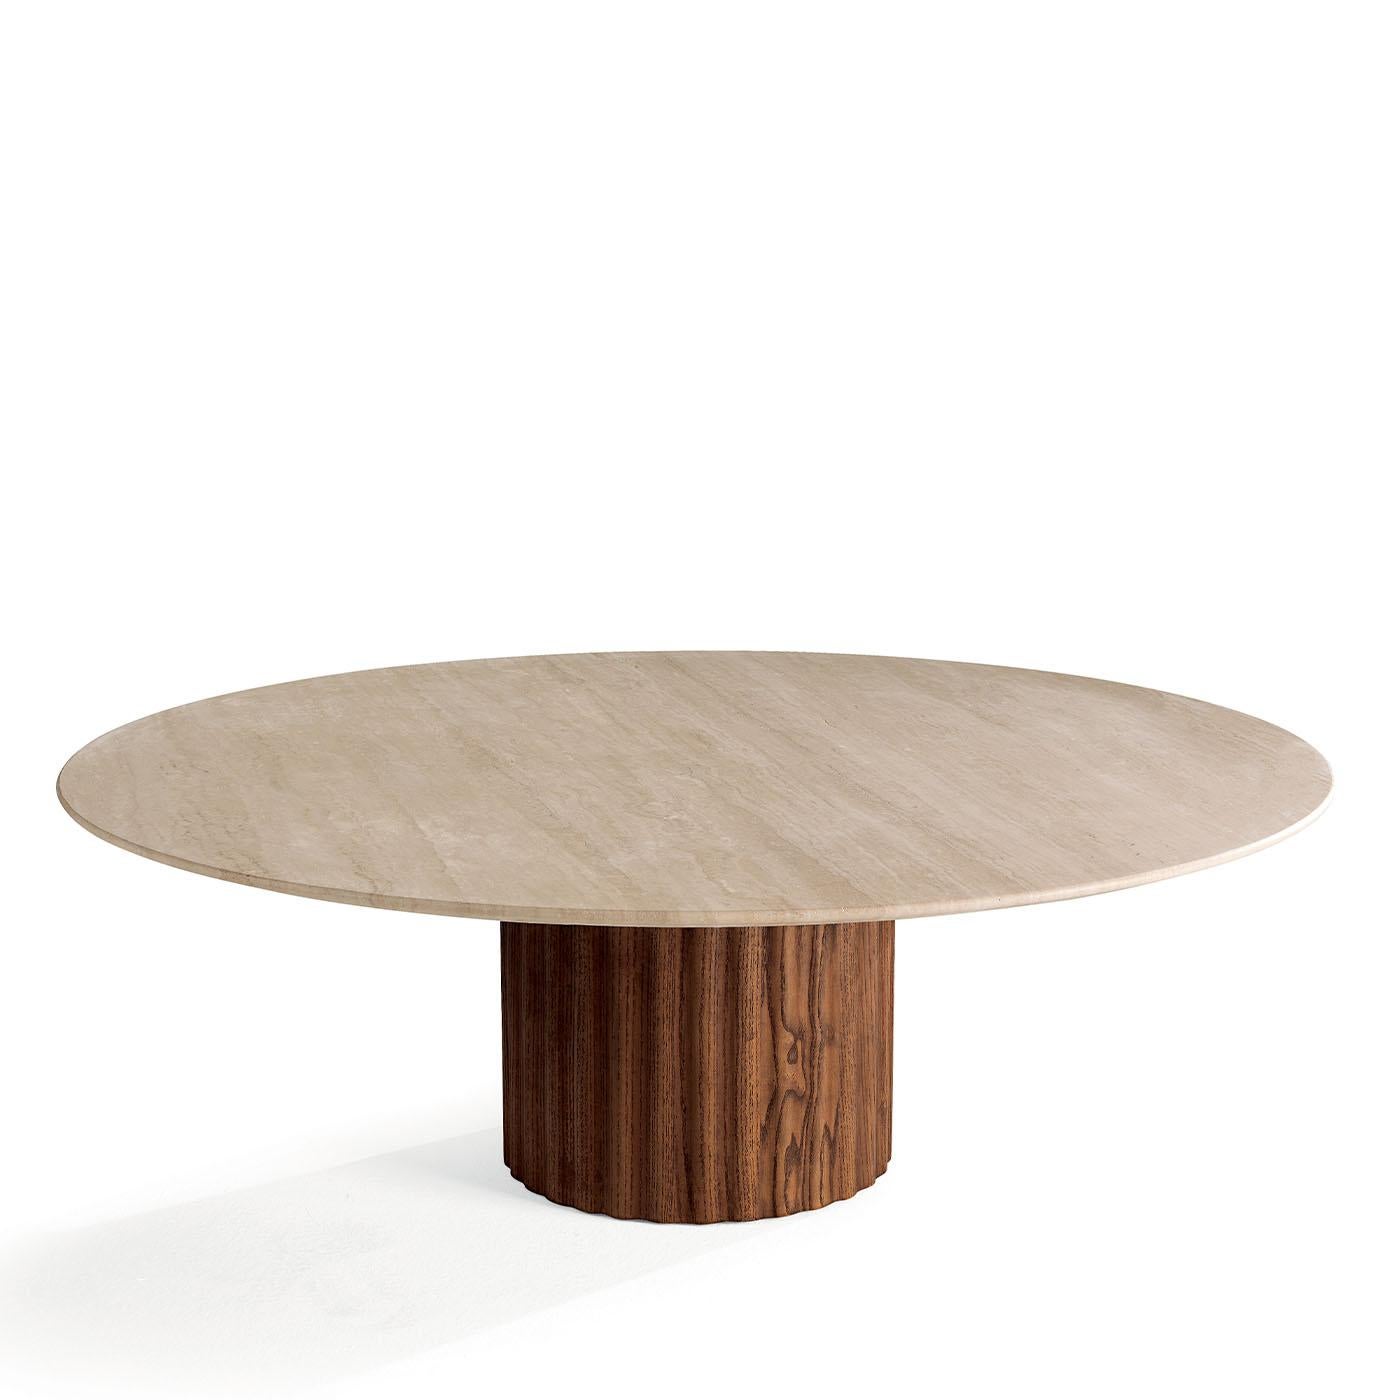 A sophisticated addition to elegant modern interiors, this coffee table boasts harmoniously distributed volumes enhanced by natural materials. A wide round top in Travertine marble gets sustained by a sturdy bronzed metal frame in turn fitted to a